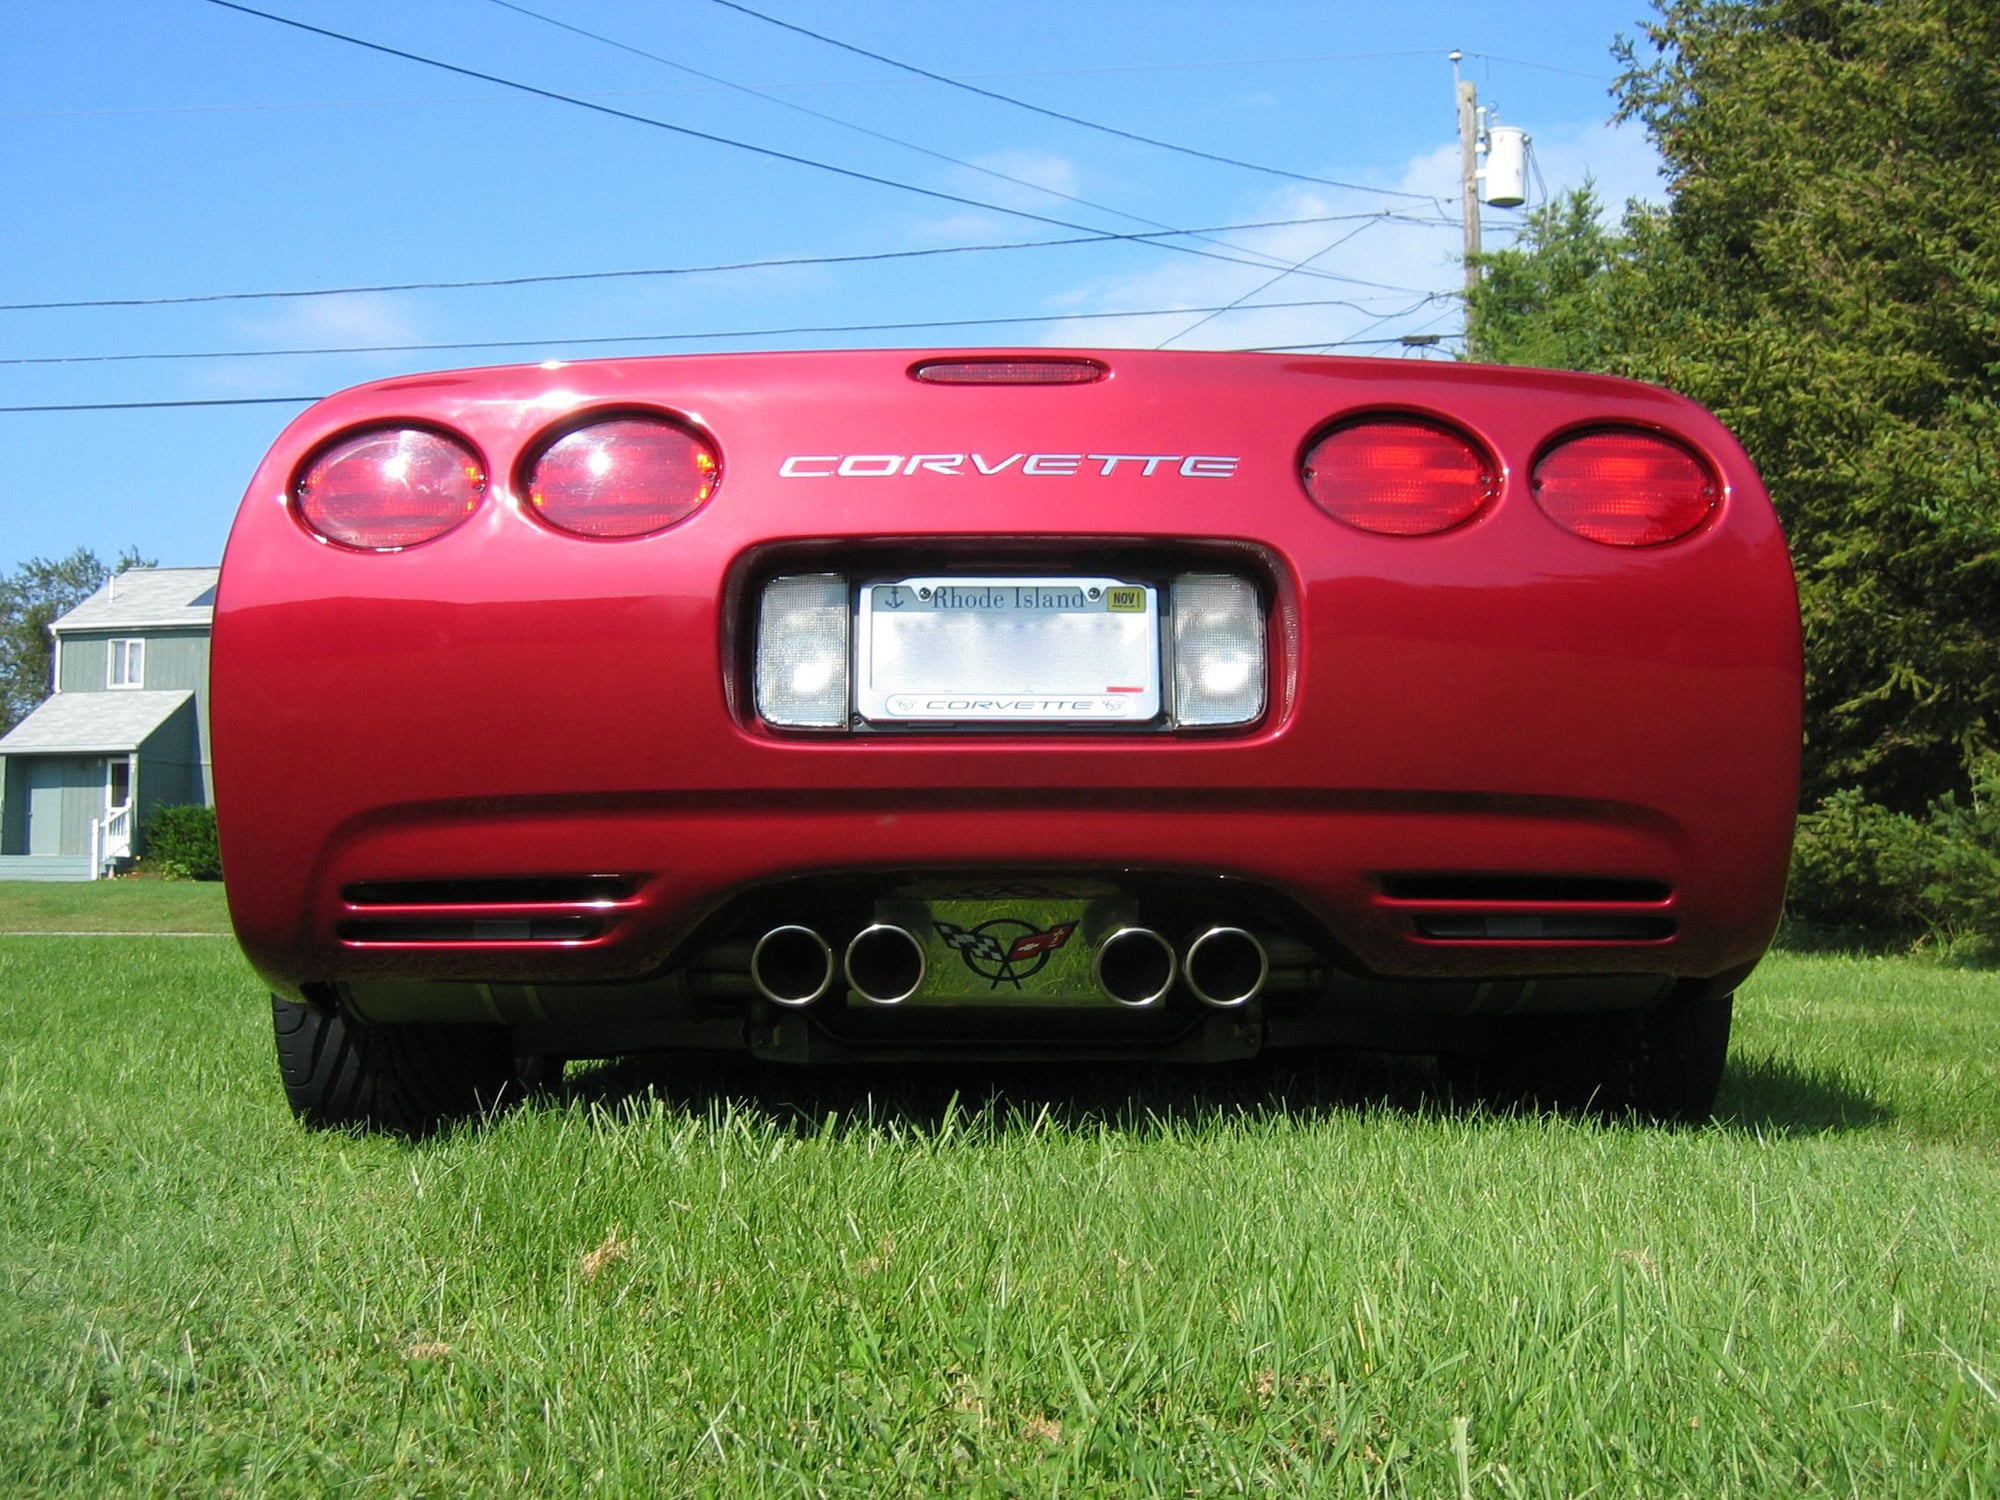 2002 Chevrolet Corvette - 2002 Modified Corvette Convertible - Used - VIN 1G1YY32G825112566 - 42,766 Miles - 8 cyl - 2WD - Manual - Convertible - Red - Wakefield, RI 02879, United States